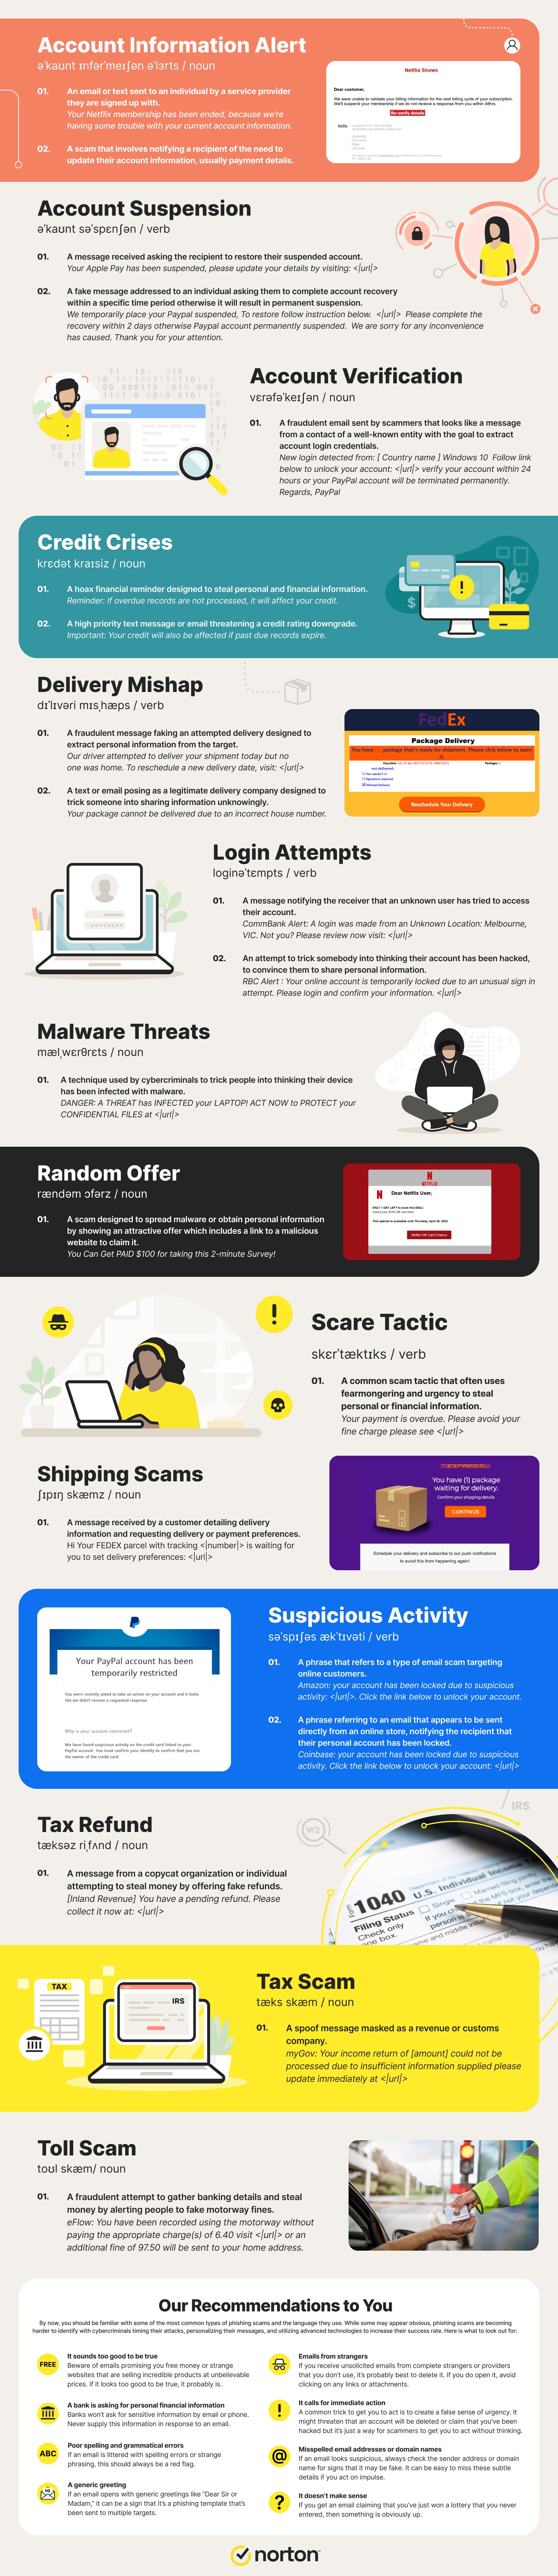 This infographic exposes common examples of phishing attacks and shares recommendations for how to spot phishing. 